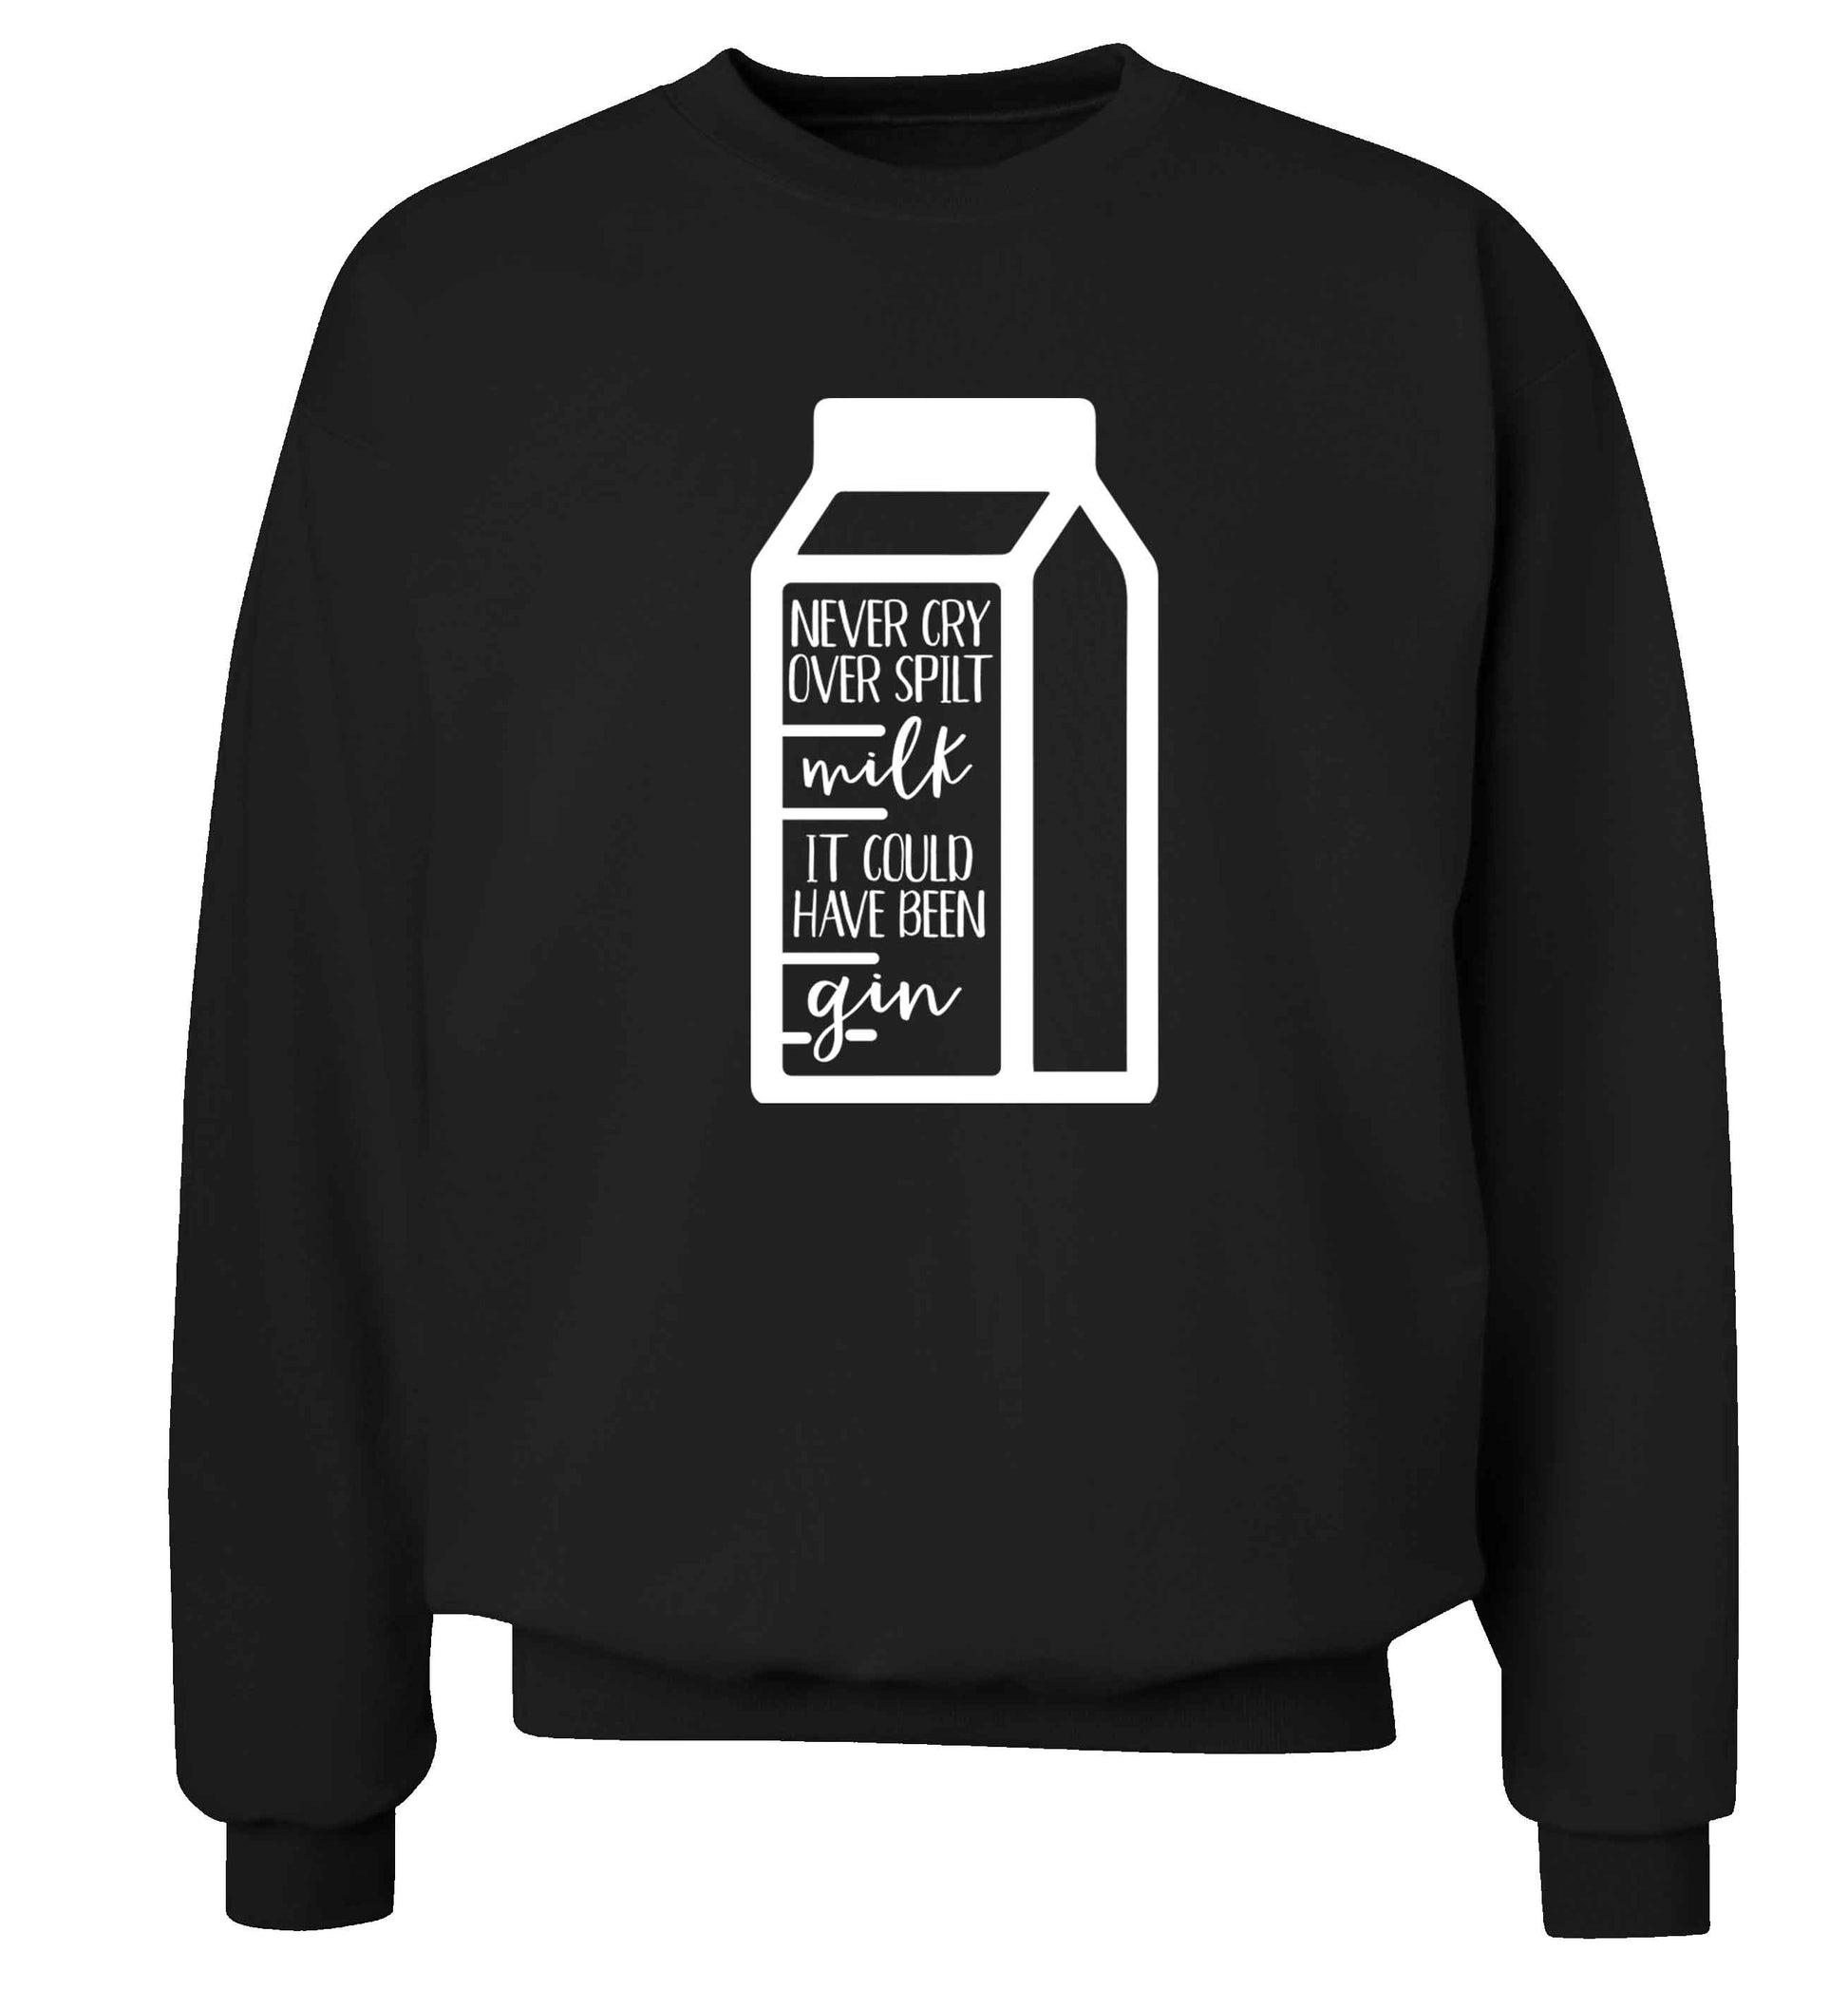 Never cry over spilt milk, it could have been gin Adult's unisex black Sweater 2XL